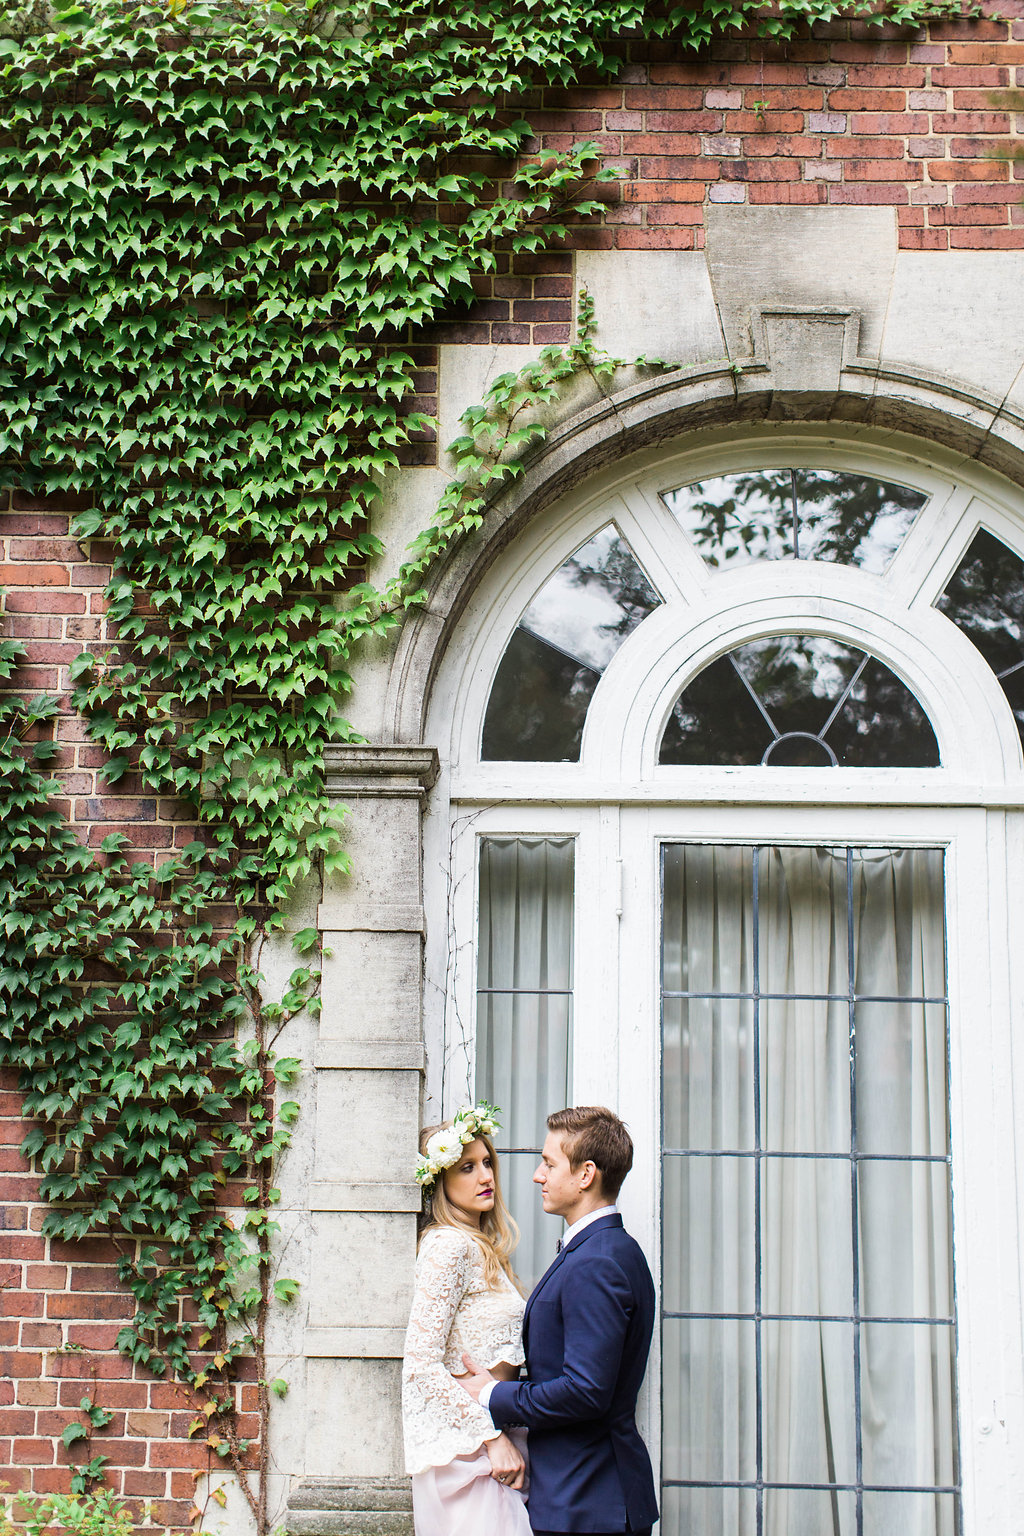 Romantic Engagment Session | The Day's Design | Ashley Slater Photography